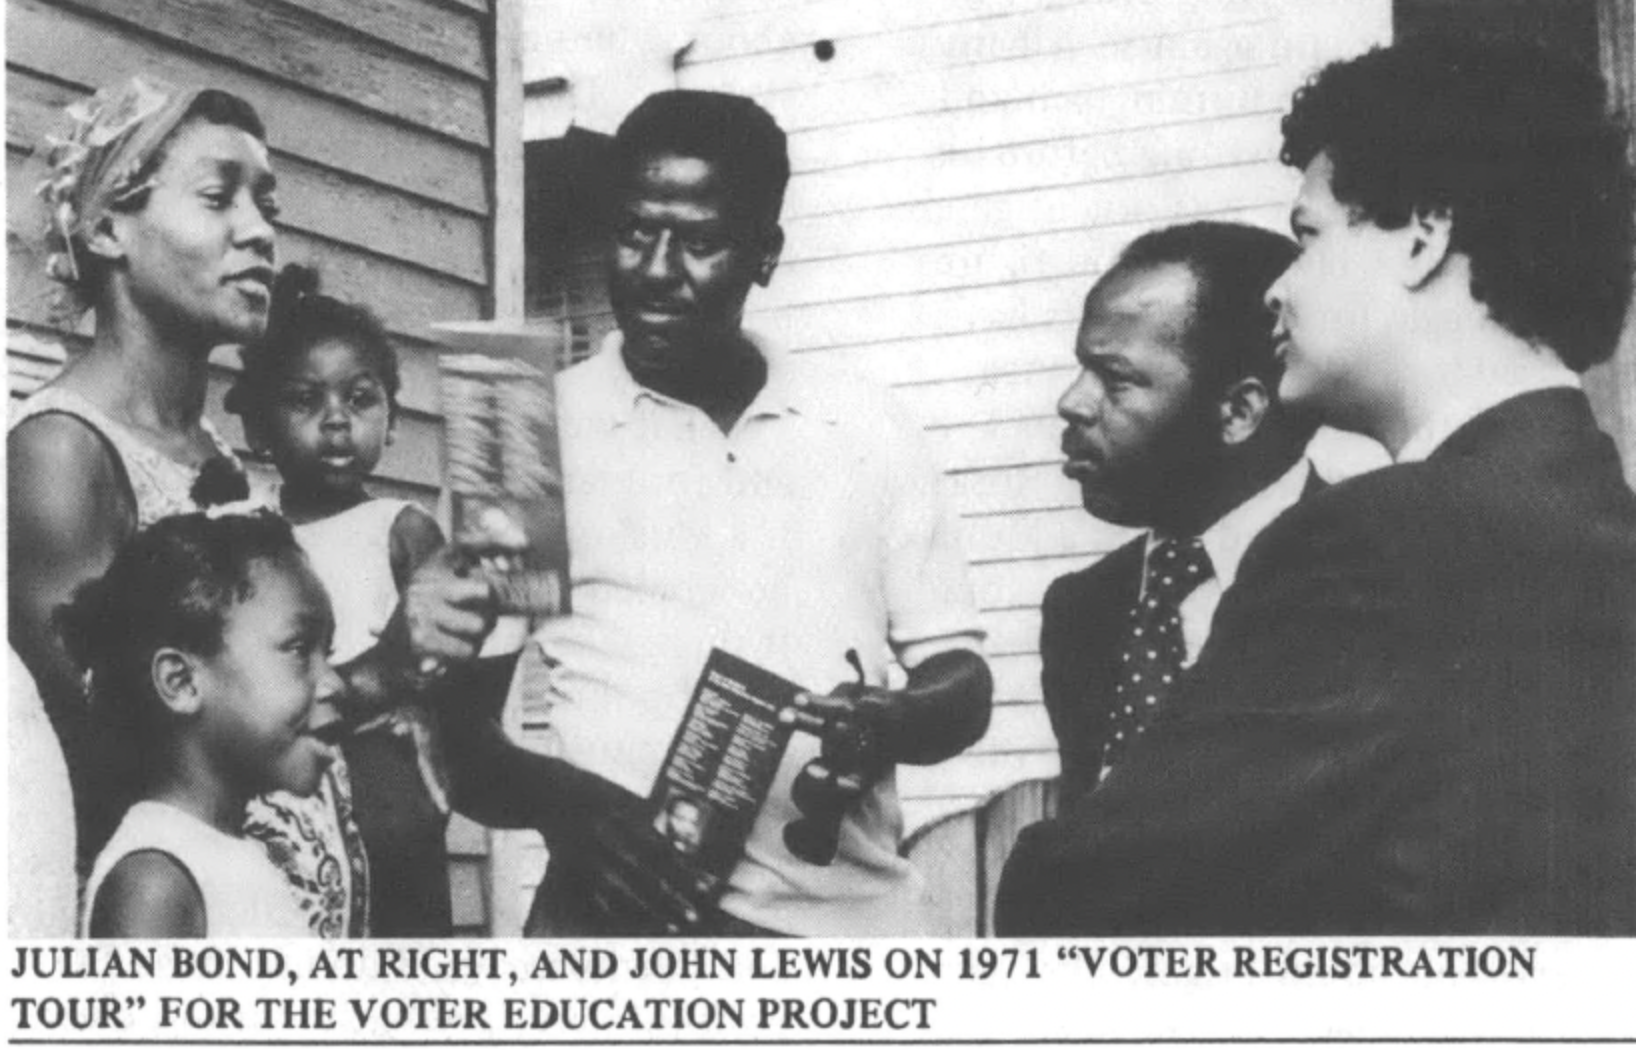 Julian Bond and John Lewis for Voter Education Project